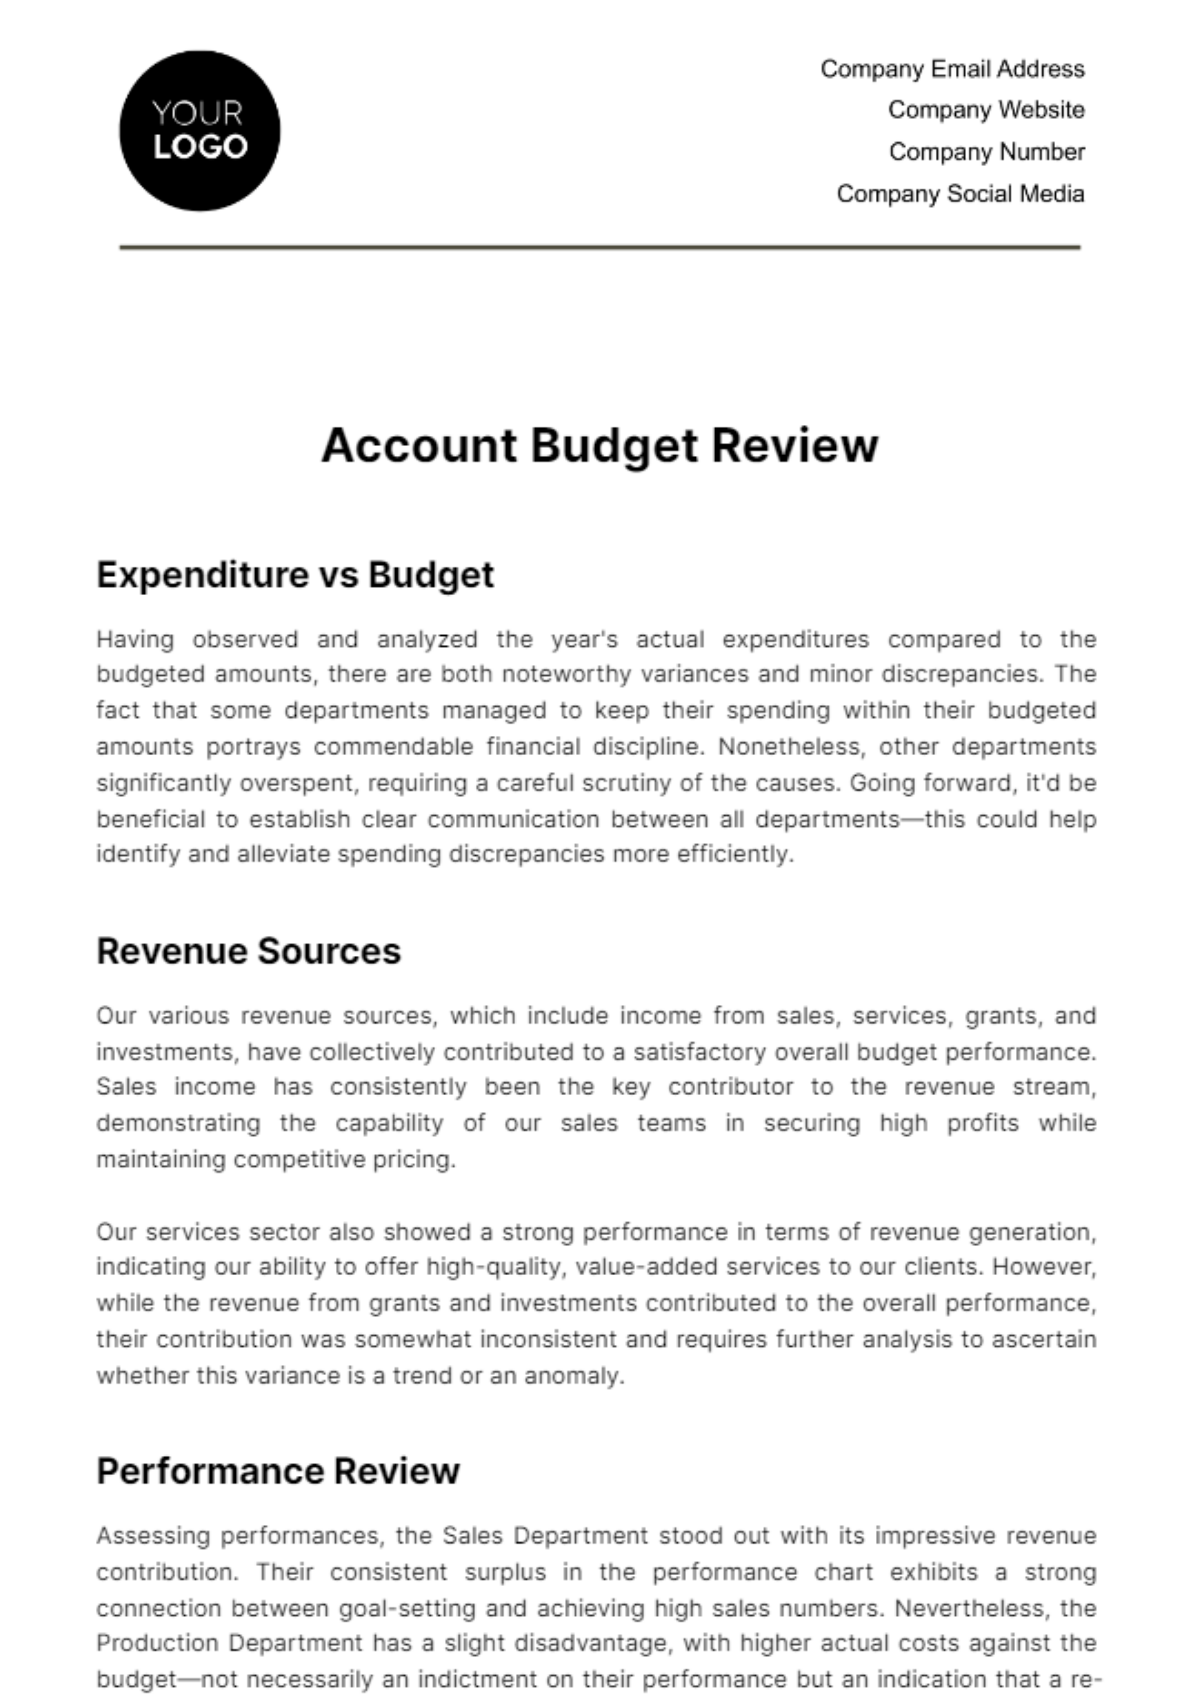 Account Budget Review Template